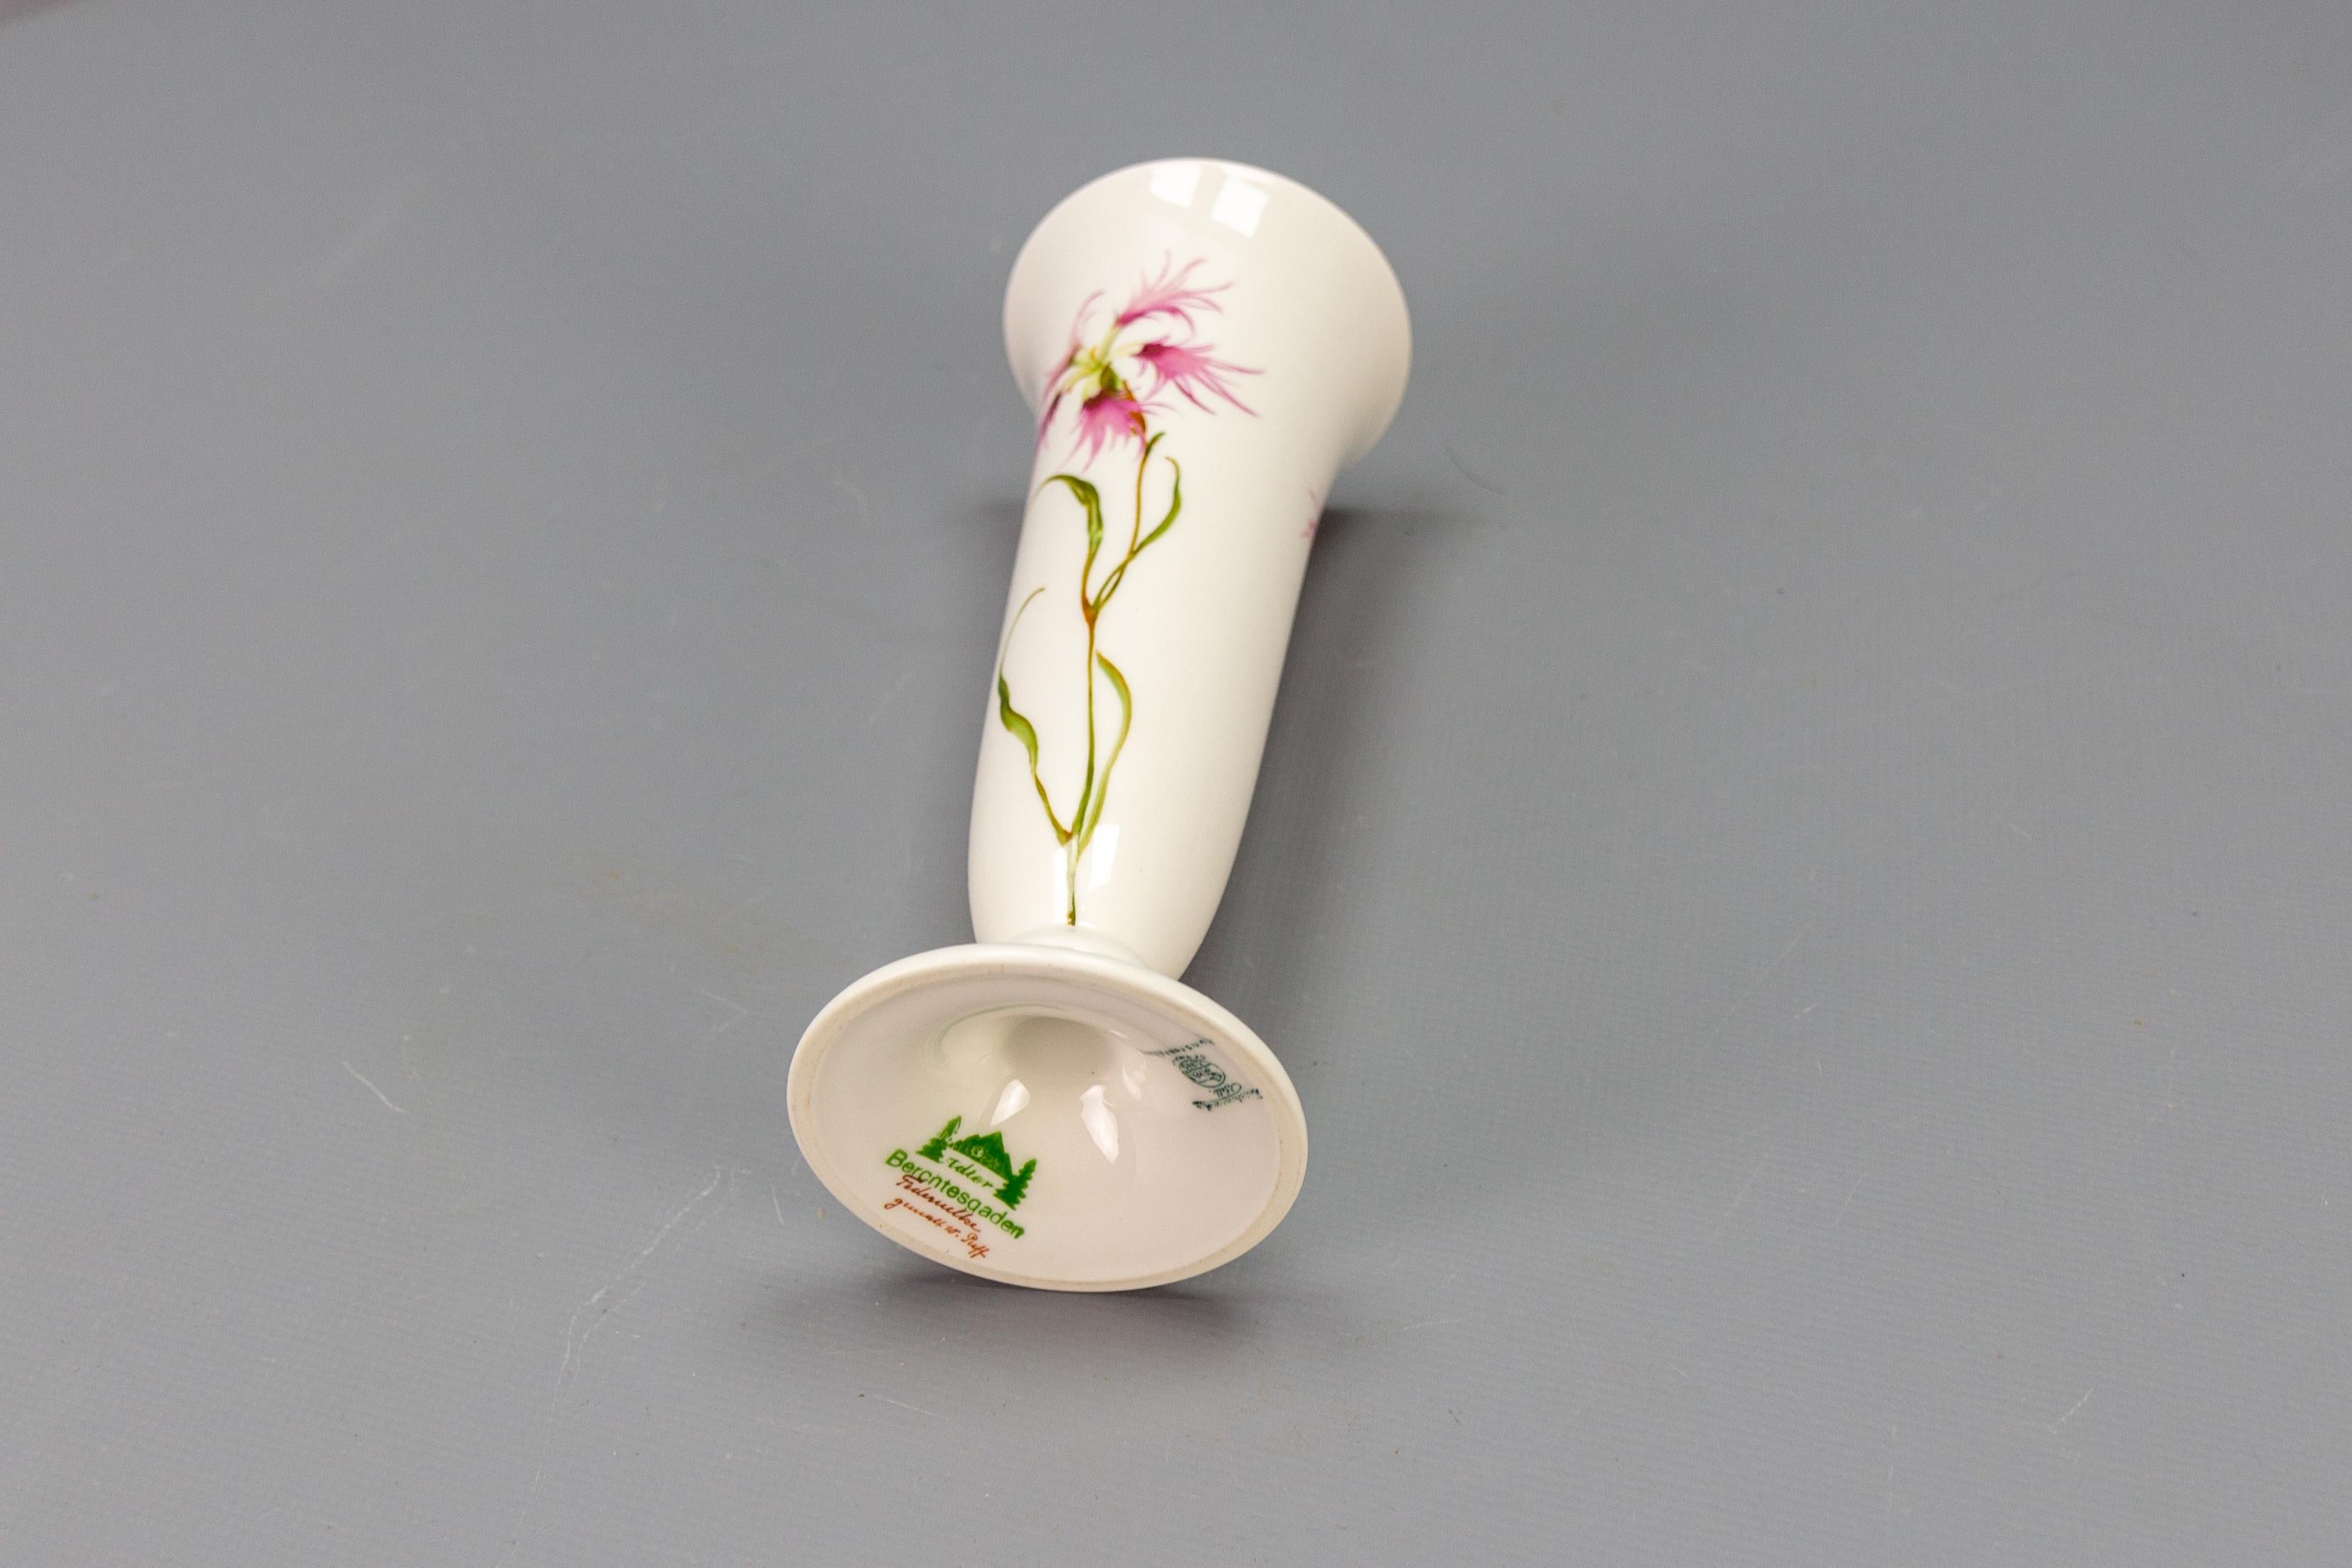 German White Porcelain Vase Pink Feather Carnation Flower by Hutschenreuther For Sale 9